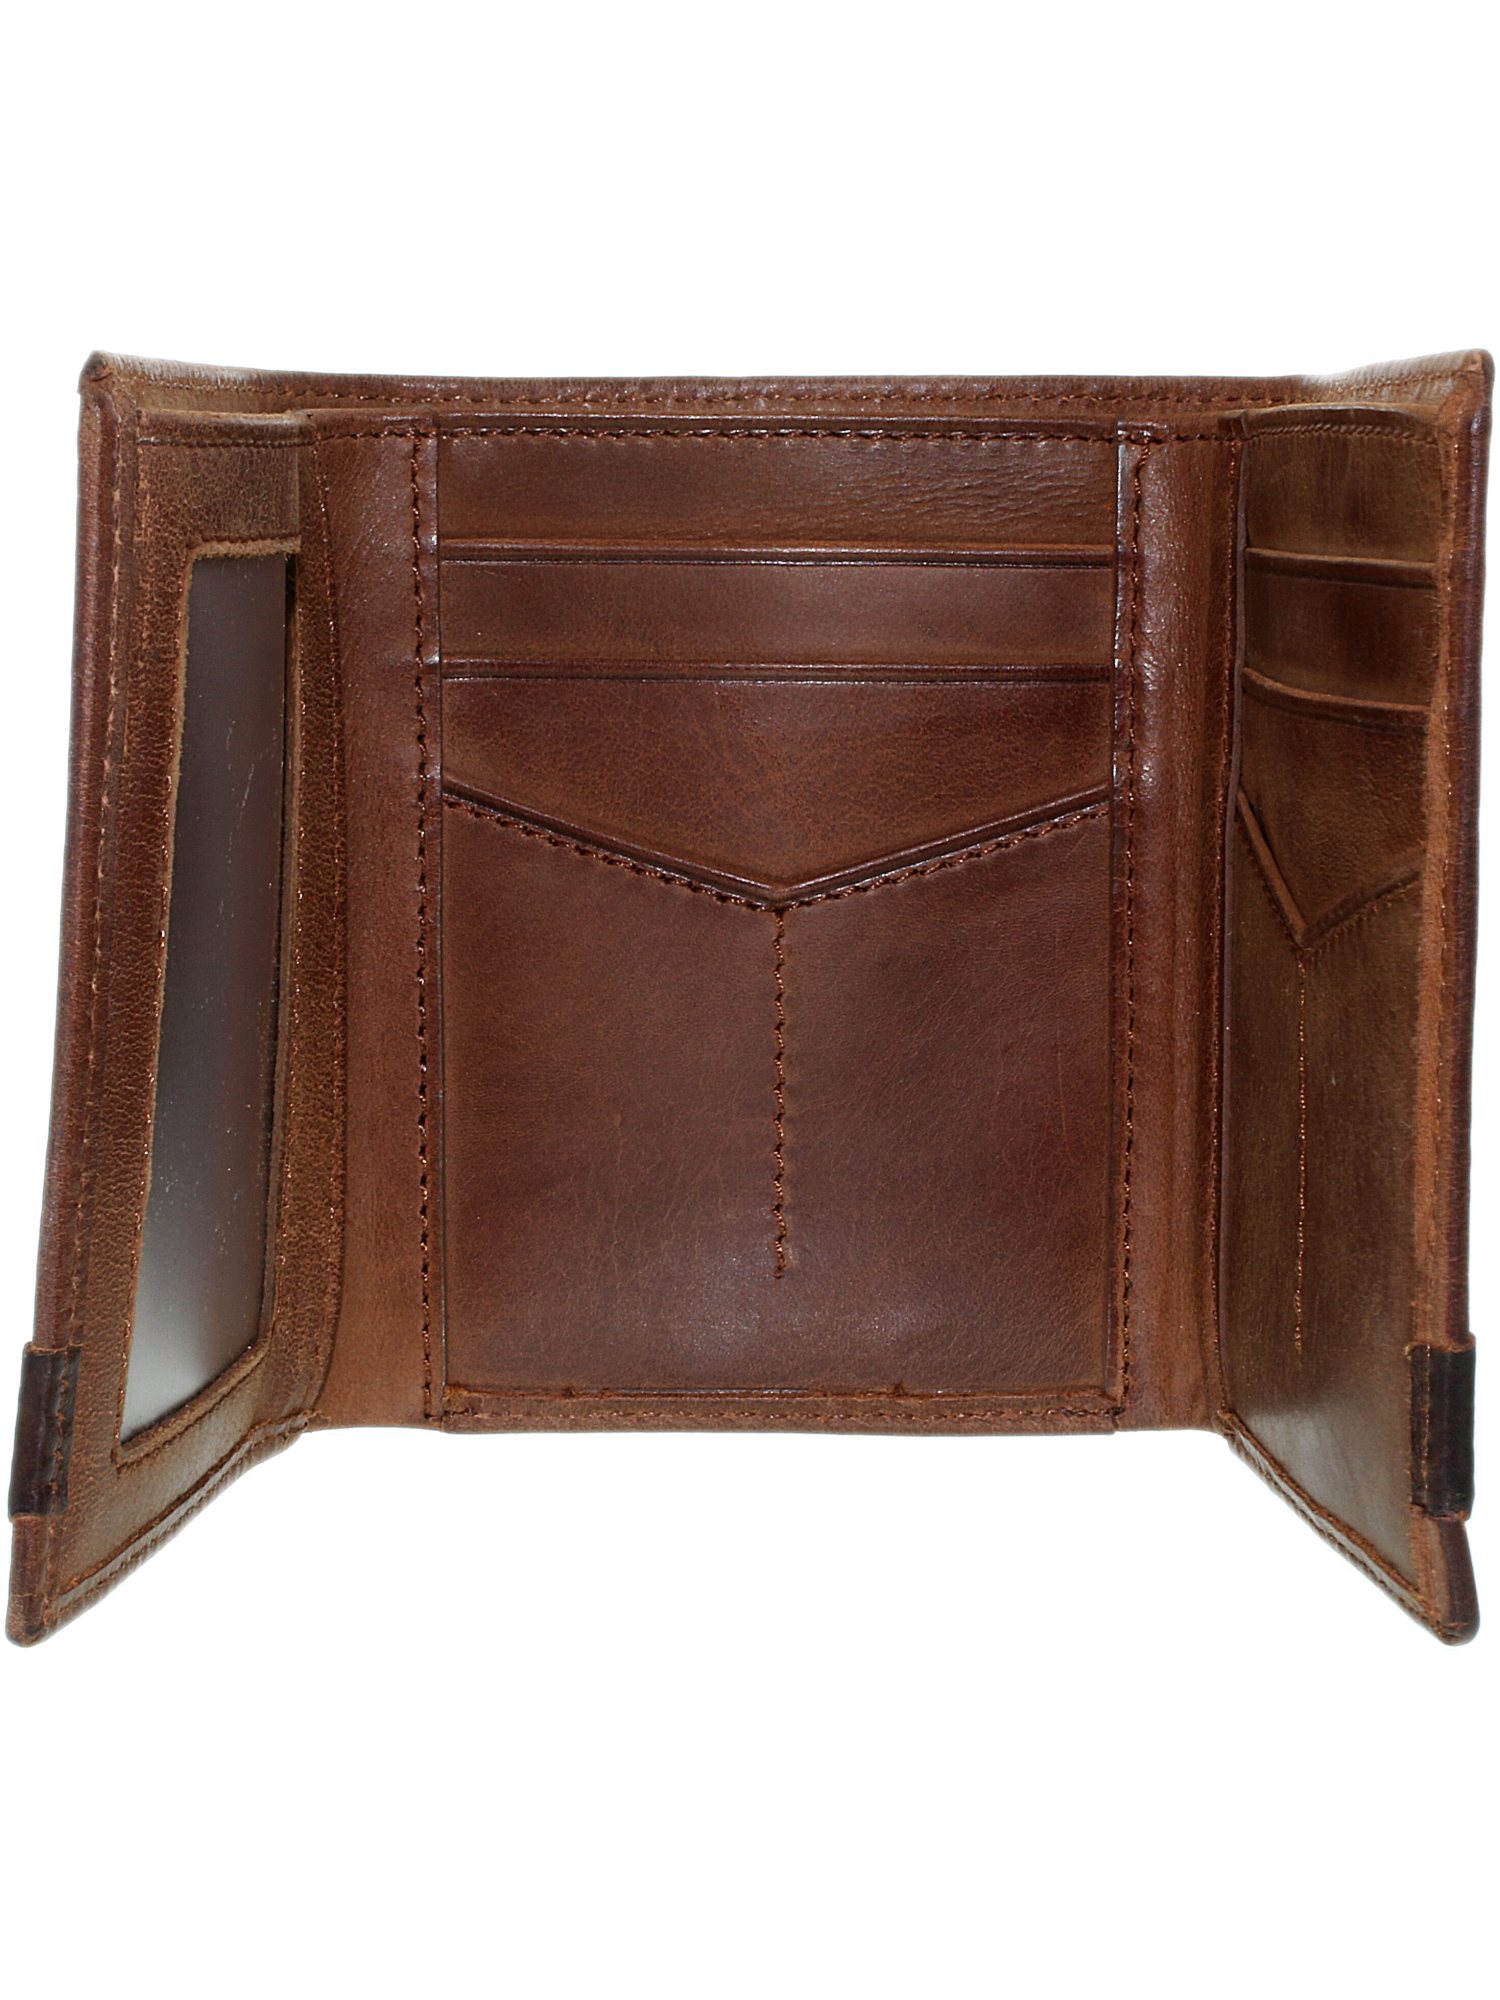 Fossil Men's Wallets For Sale | IUCN Water